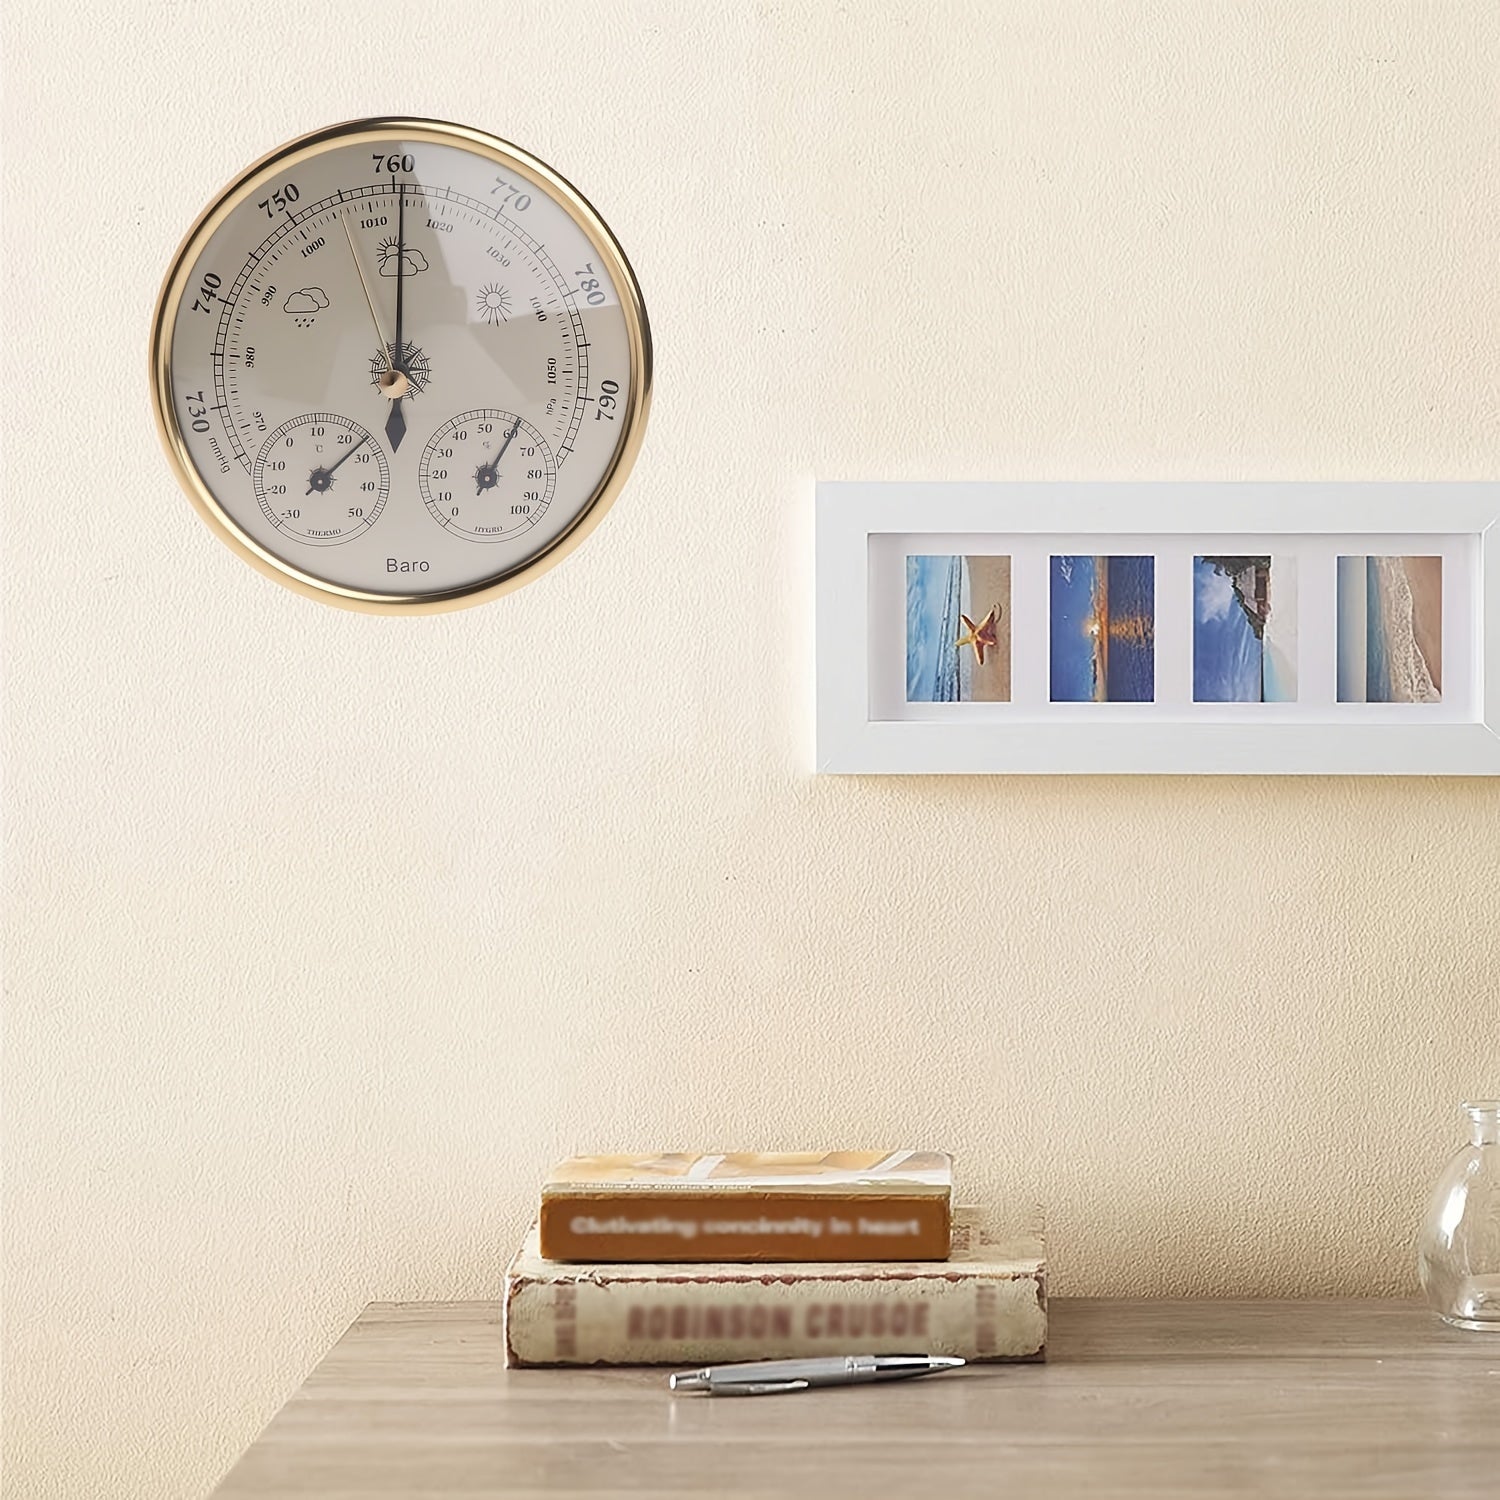 Wall Mounted Barometer For Weather Monitoring Research Sailing Gardening Indoor